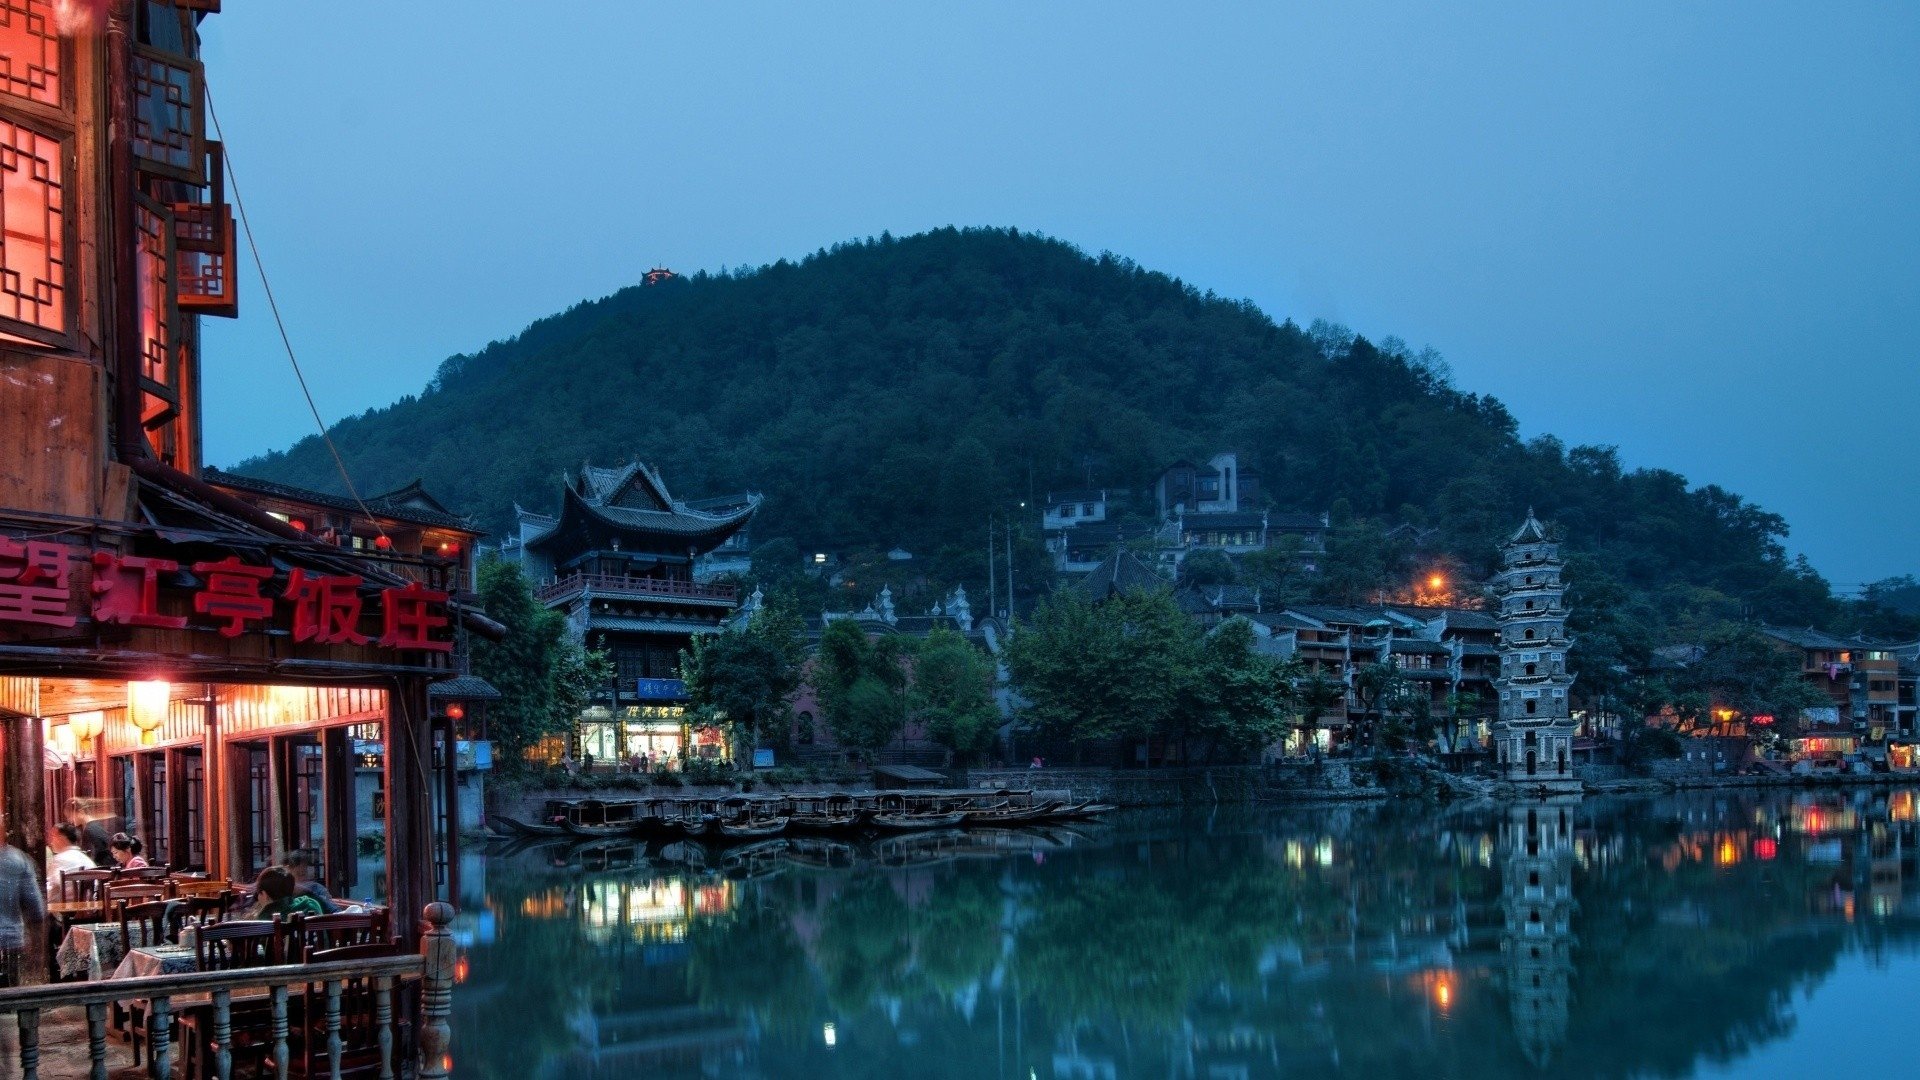 china, House, Buildings, Hills, Trees, Lake, Water, Night, Sunset, Lights, City, Landscape, Reflection, Town, Asian, Oriental, Village Wallpaper